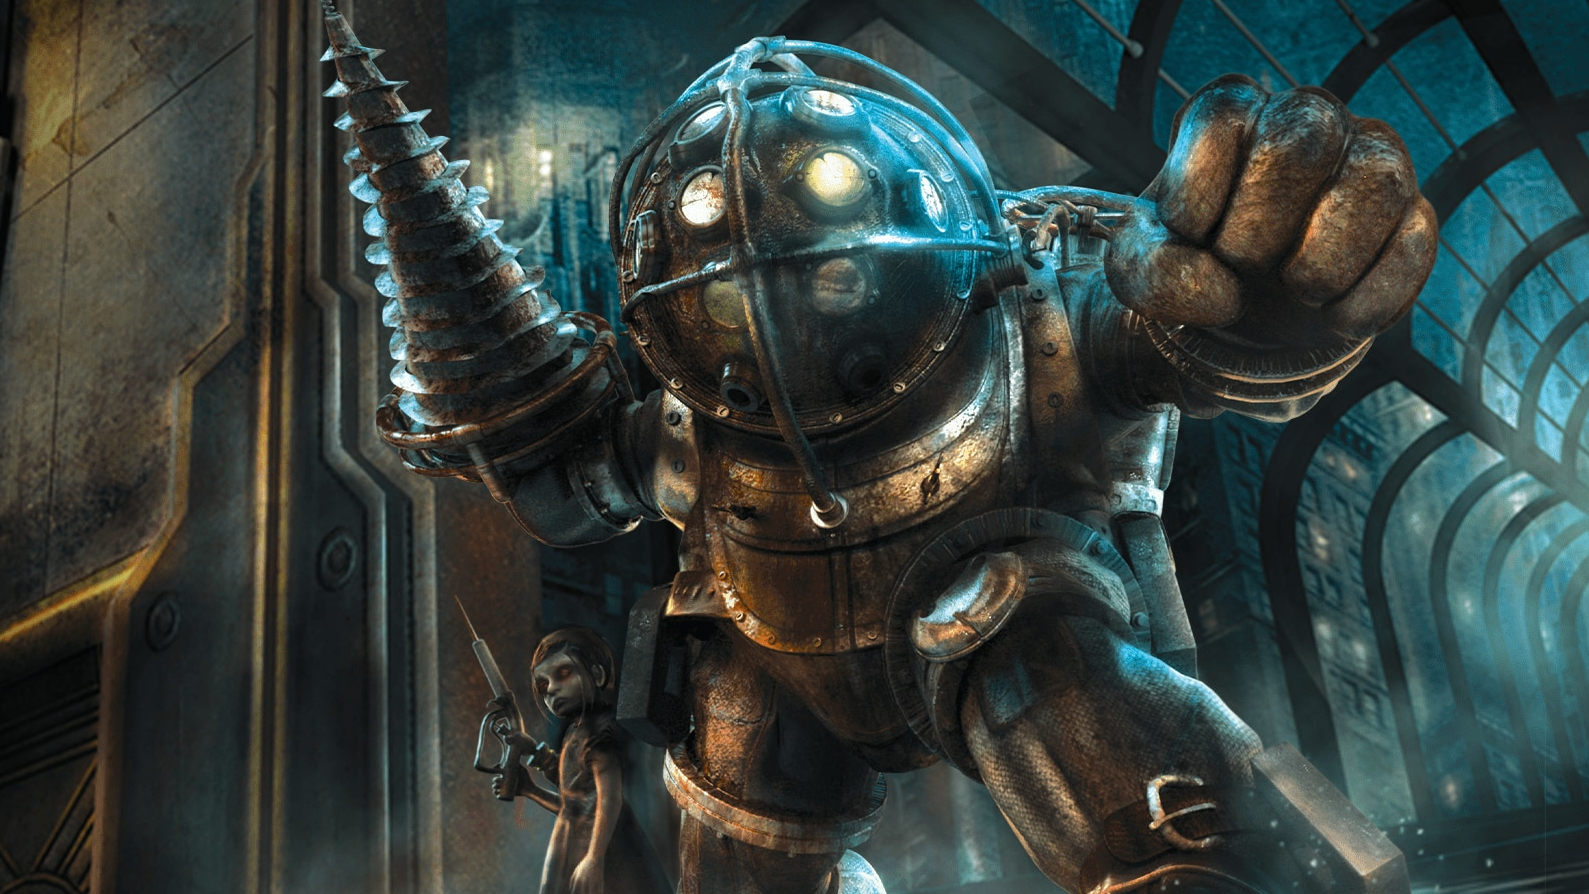 Bioshock Franchise Takes Players on a Thrilling and Mind-Bending Adventure in Columbia